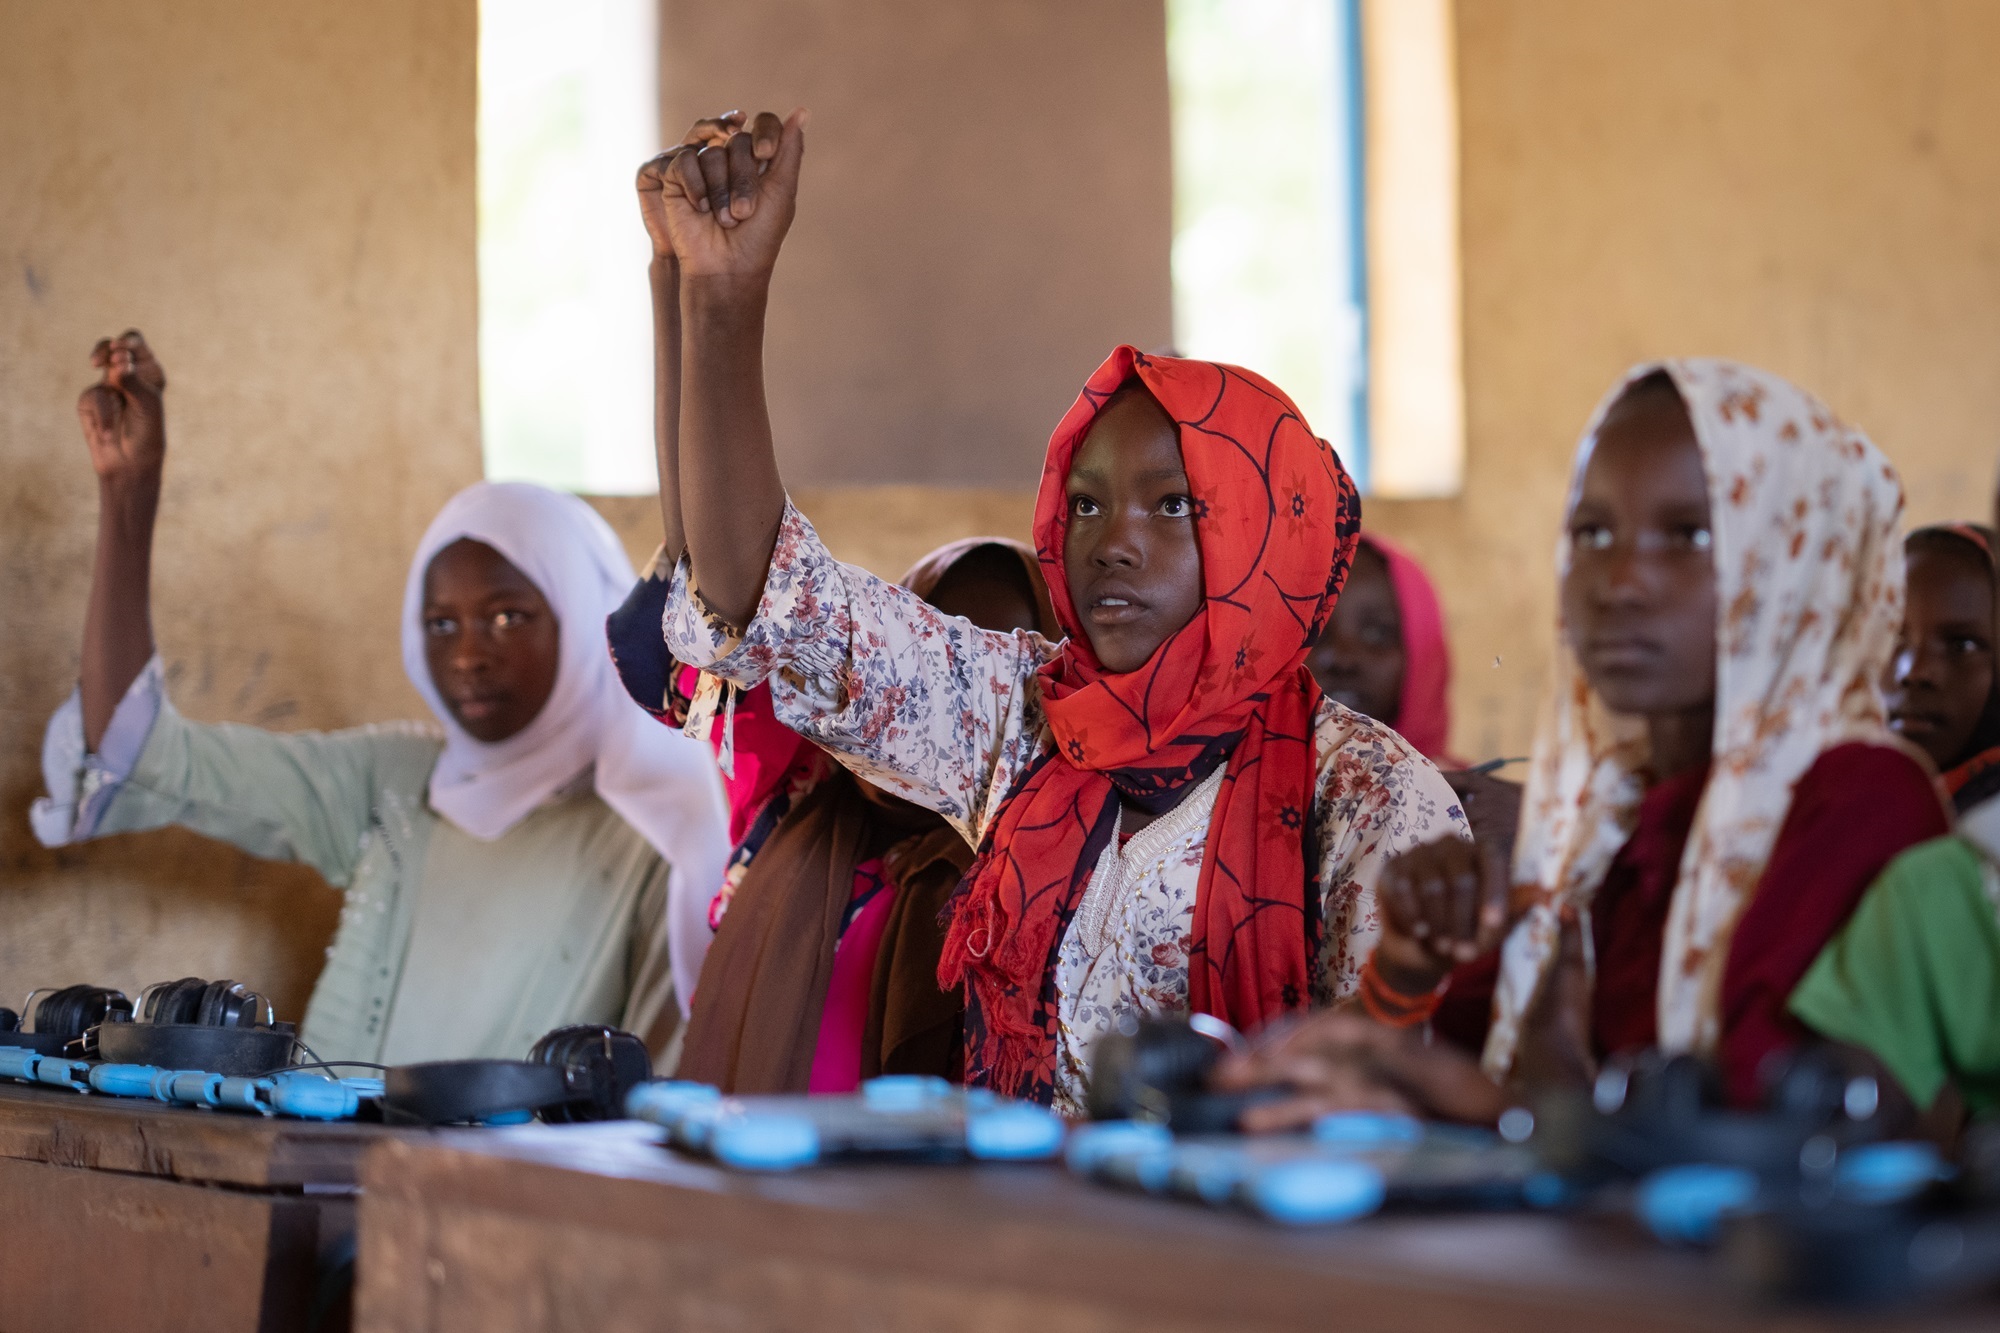 14-year-old student Sumaya Abdel Rahman Mahmoud Mohamad, centre, raises her hand during a lesson, part of an EdTech program developed by War Child named ‘Can’t Wait to Learn’, at a school in Djabel Refugee Camp, Eastern Chad. (Michael Knief/Global Partnership for Education)